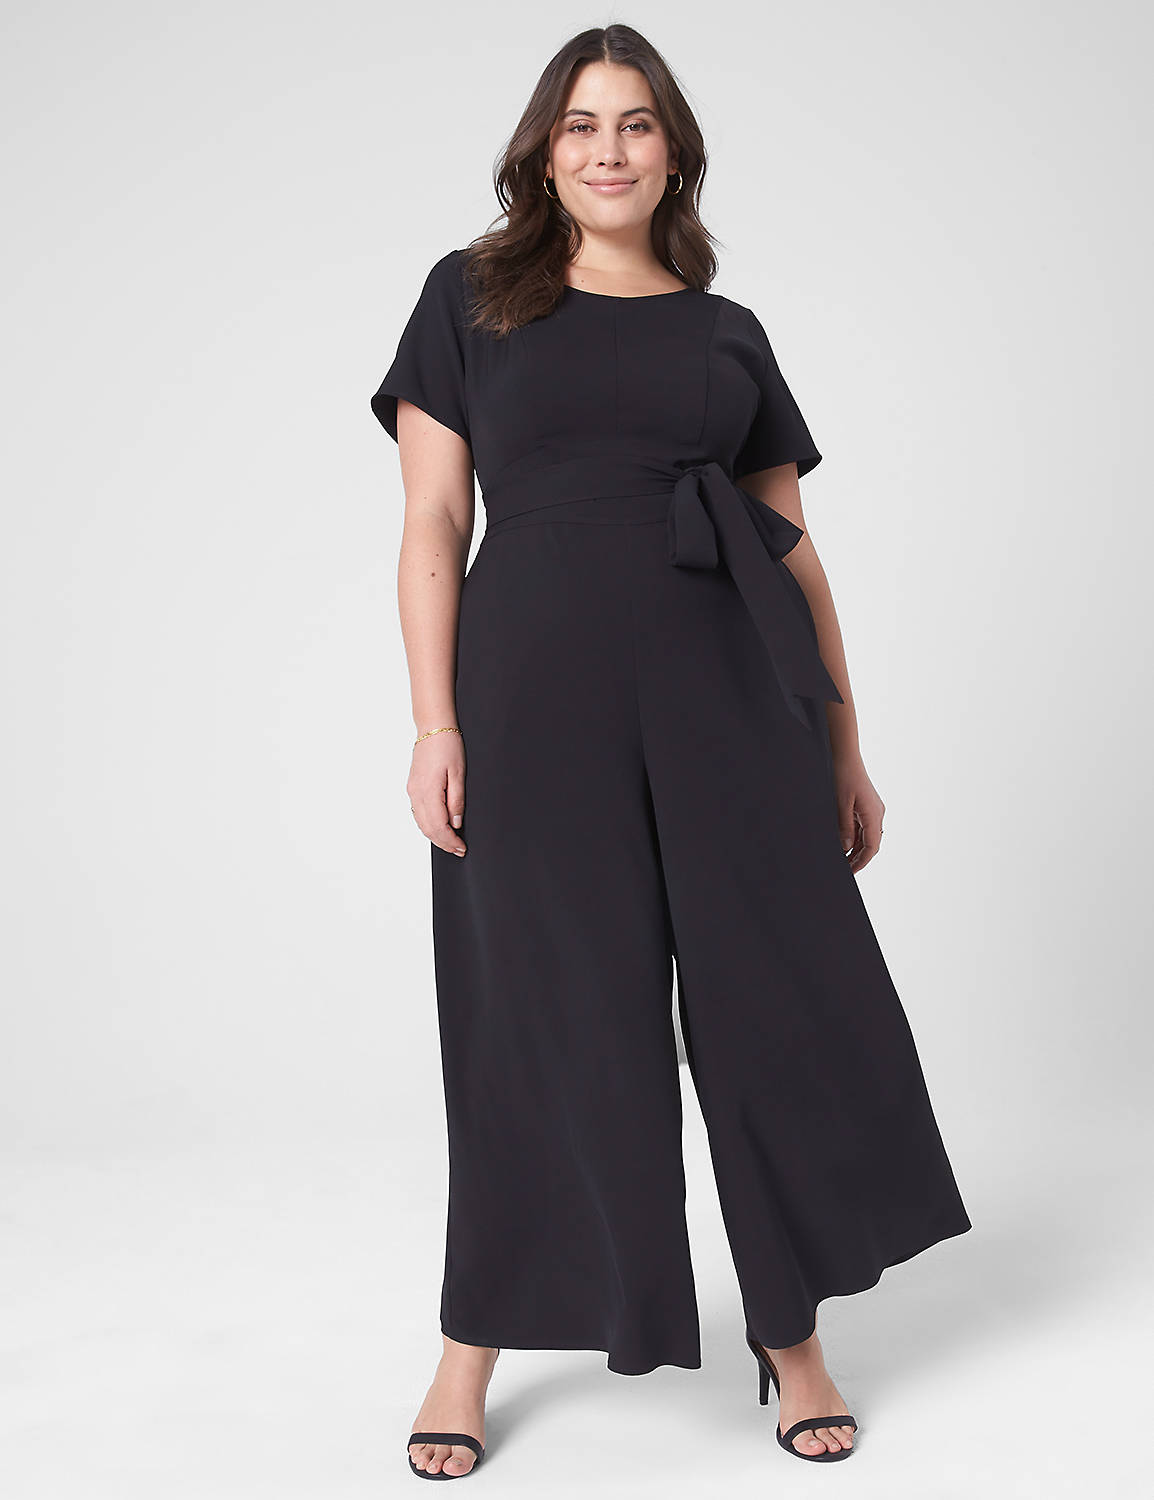 SS OPEN CREW NK ANKLE WIDE LEG LENA Product Image 1